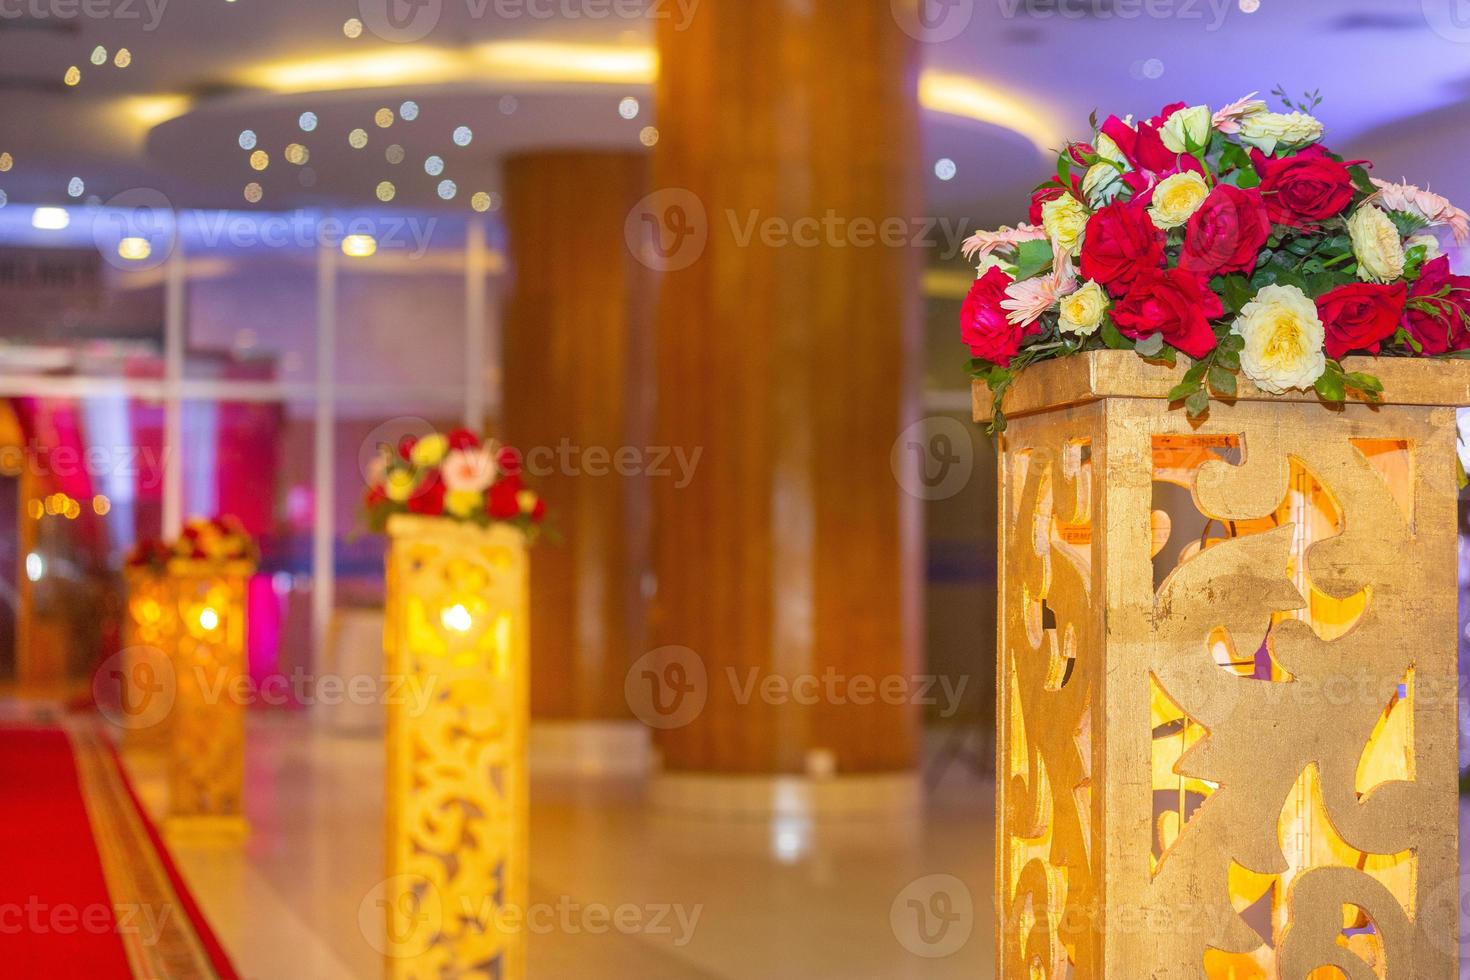 Colorful light box with paper flowers Wedding decoration in traditional wedding in Bangladesh. photo